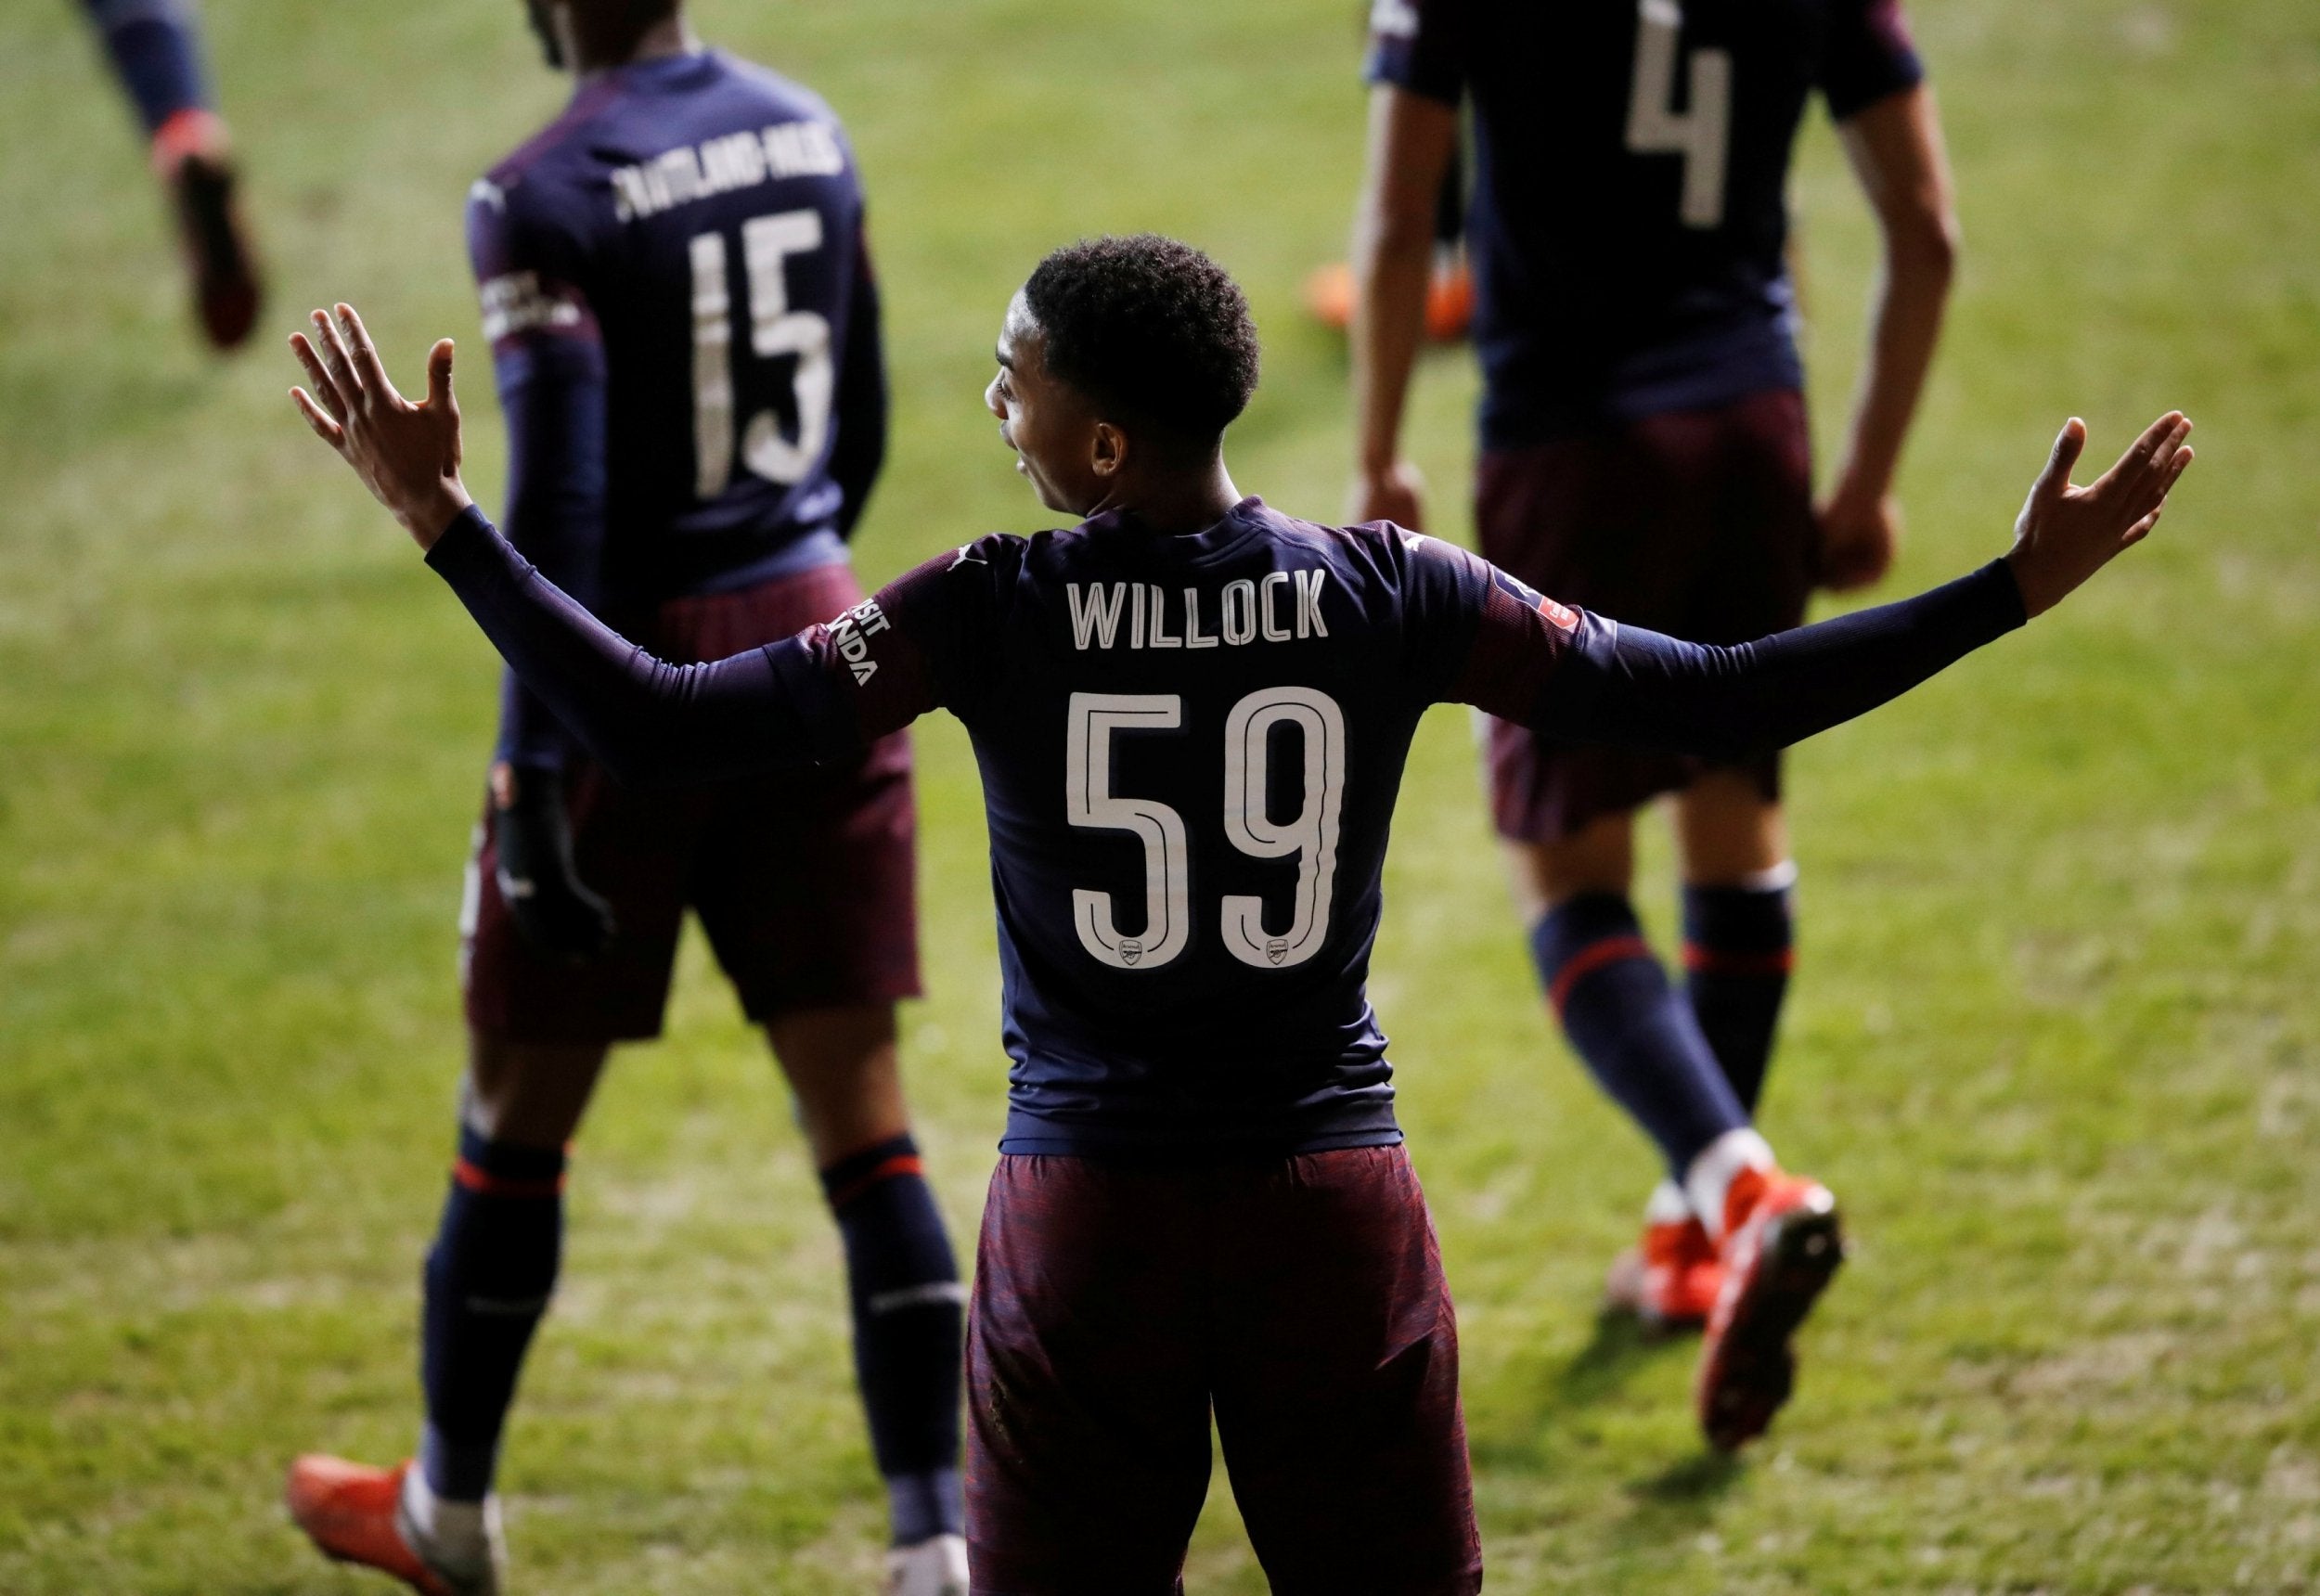 Willock celebrates after scoring his second